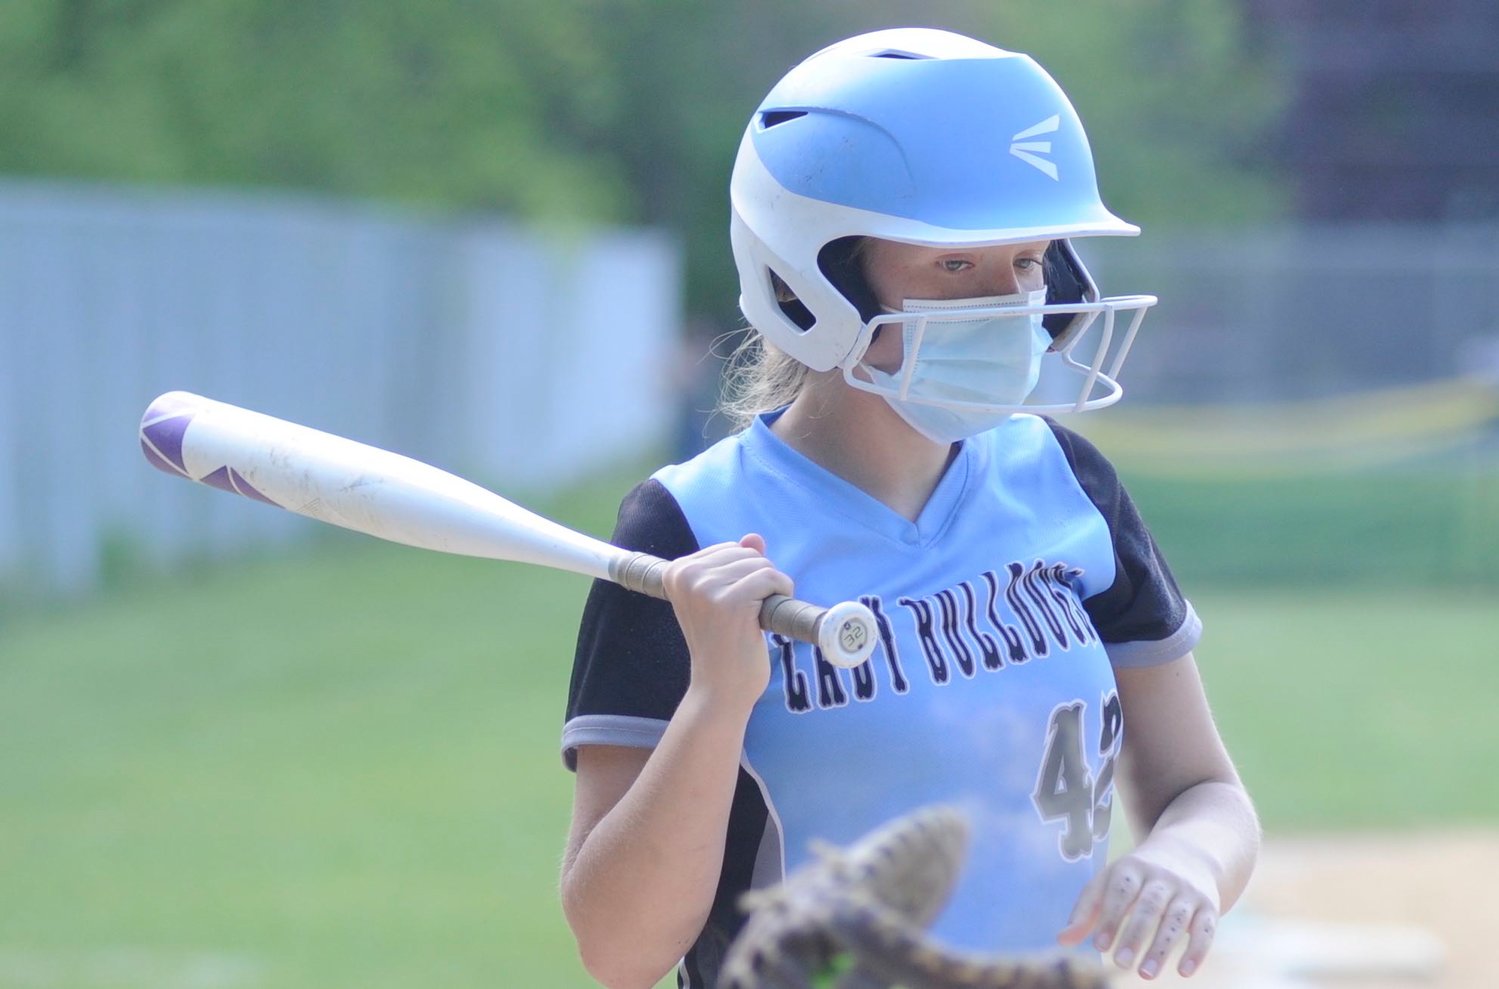 Nicole Reeves received Sullivan West’s Utility Player of the Year Award in Varsity Softball for 2021.